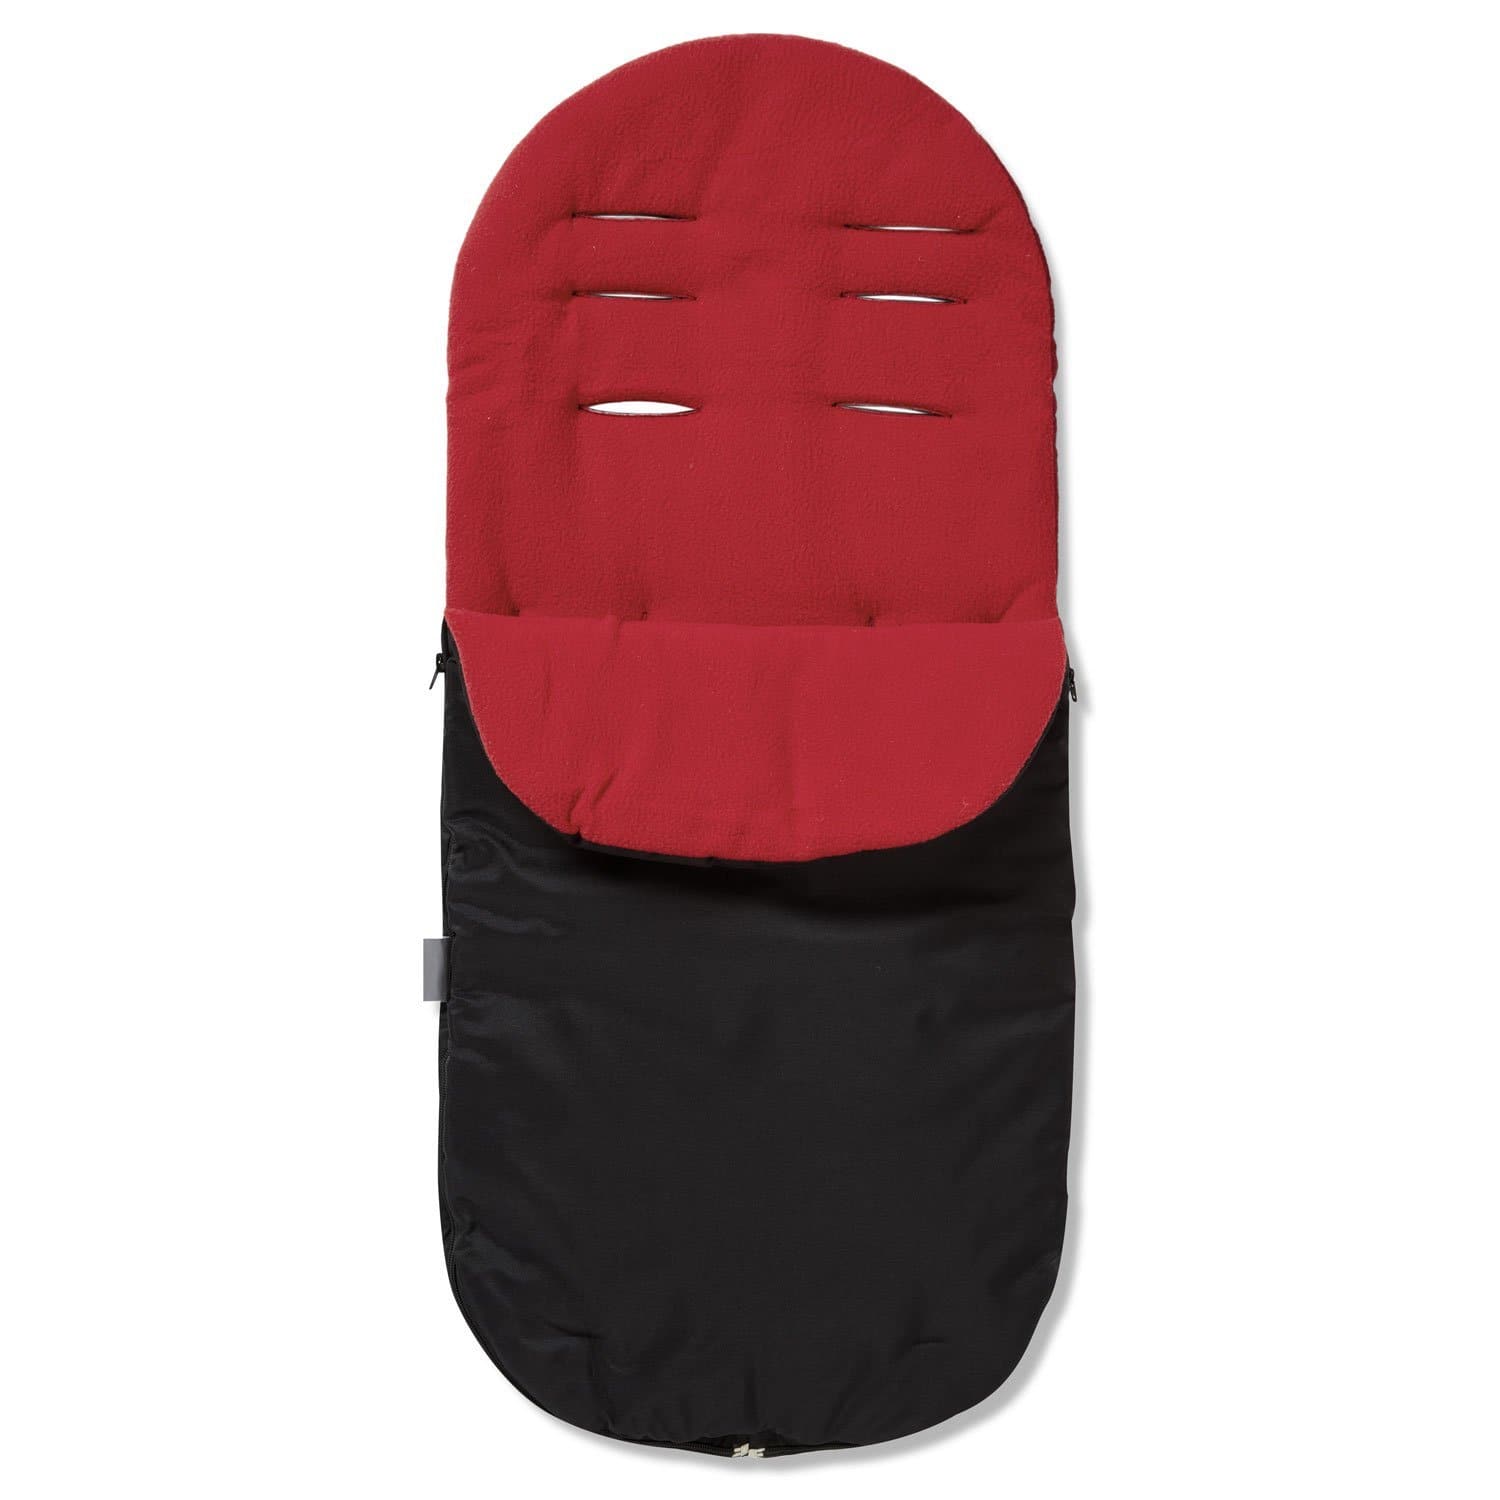 Footmuff / Cosy Toes Compatible with Kiddicouture - Red / Fits All Models | For Your Little One